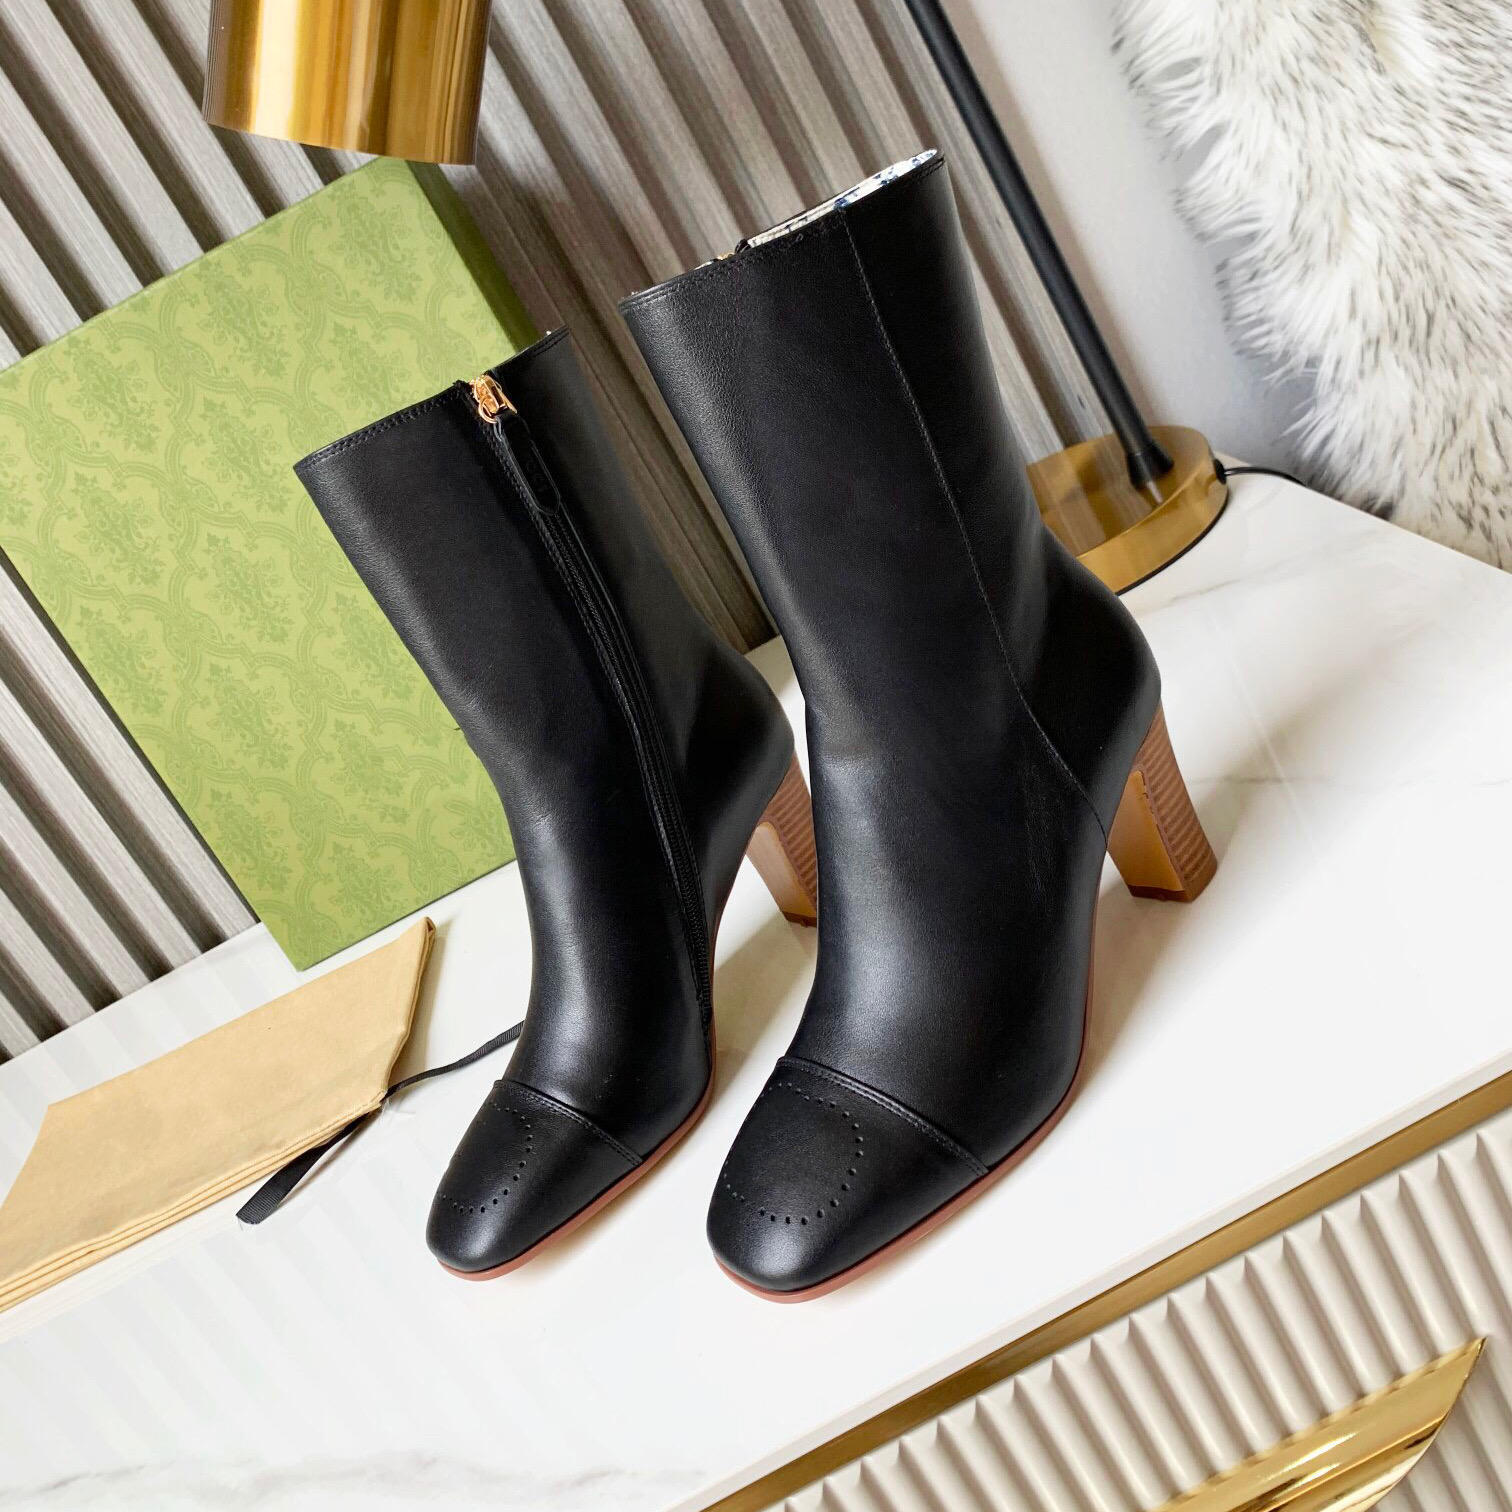 New Women's Ankle Boots Luxury designer Chelsea Boots Fashion High Heels 6cm laser punched letter square Jelly non-slip rubber leather 35-43